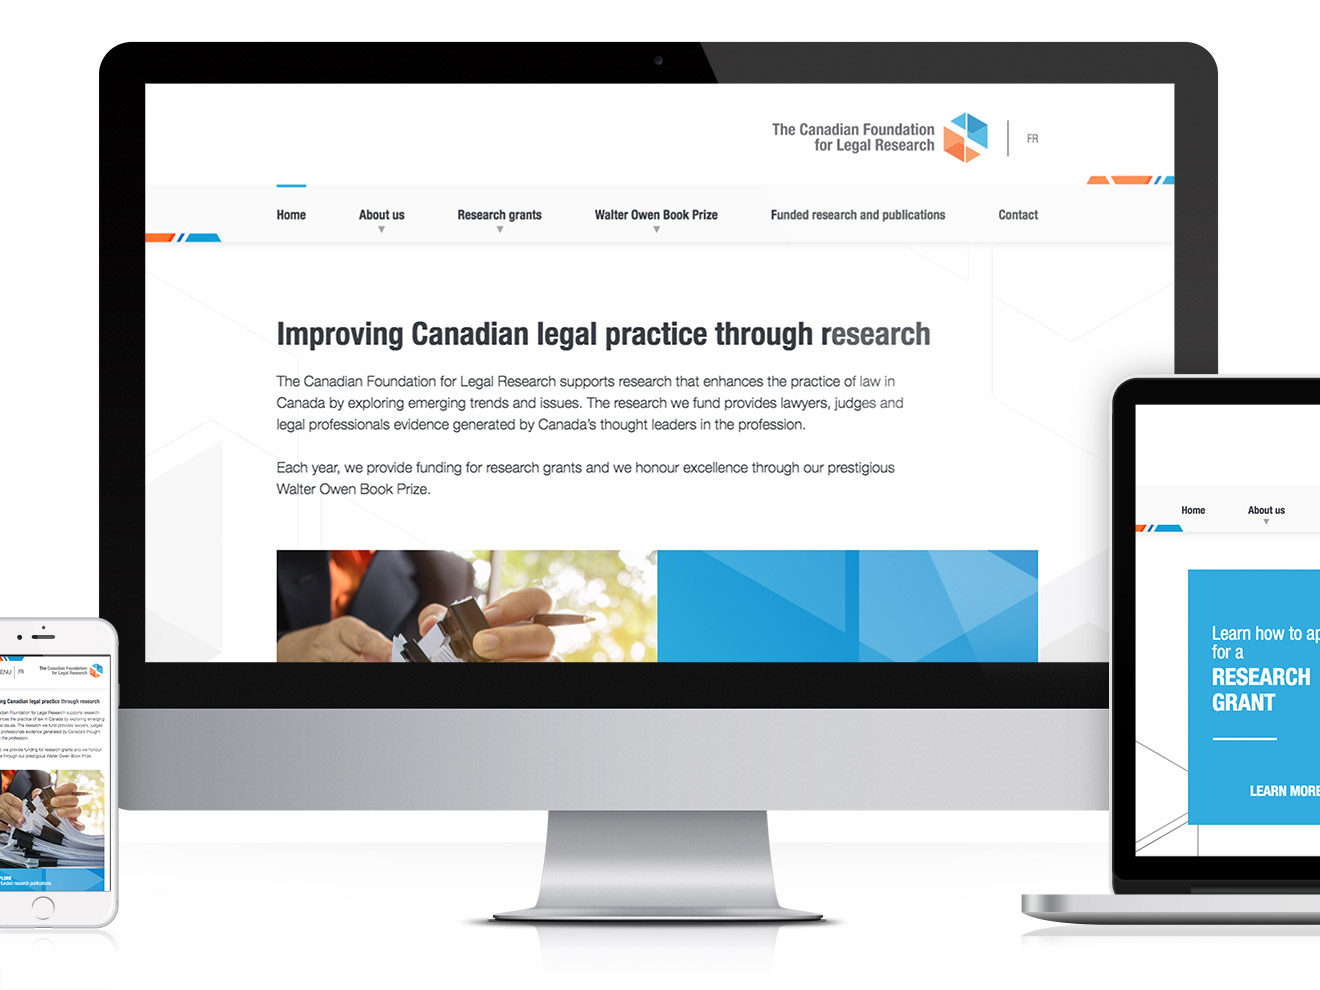 The Canadian Foundation for Legal Research, multi-media responsiveness